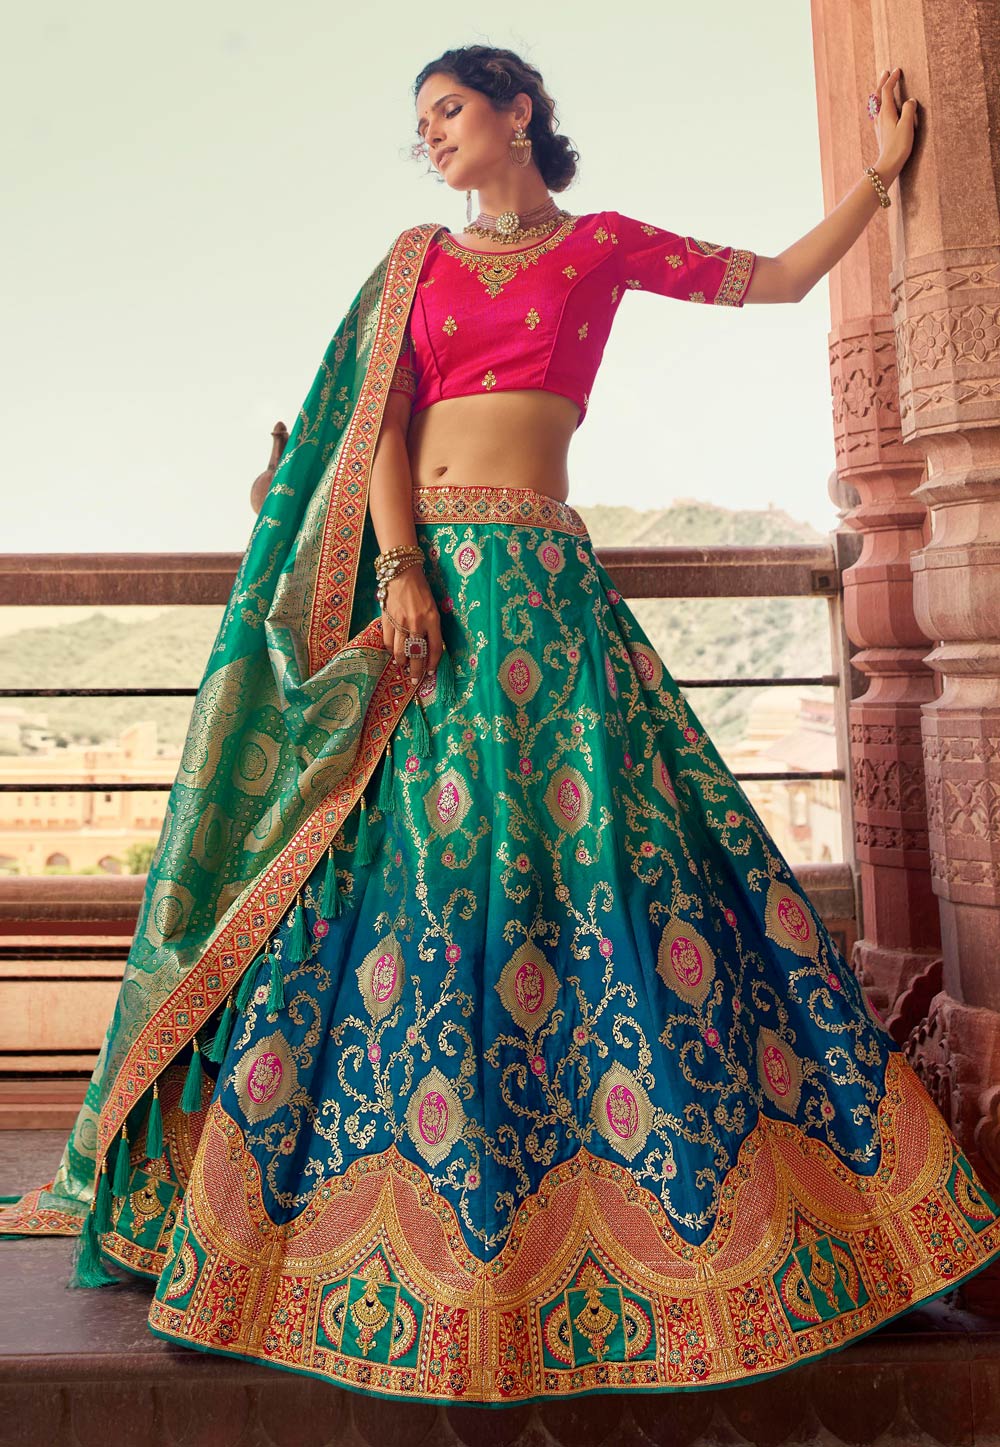 A woman in a green lehenga poses for a picture photo – Free Apparel Image  on Unsplash